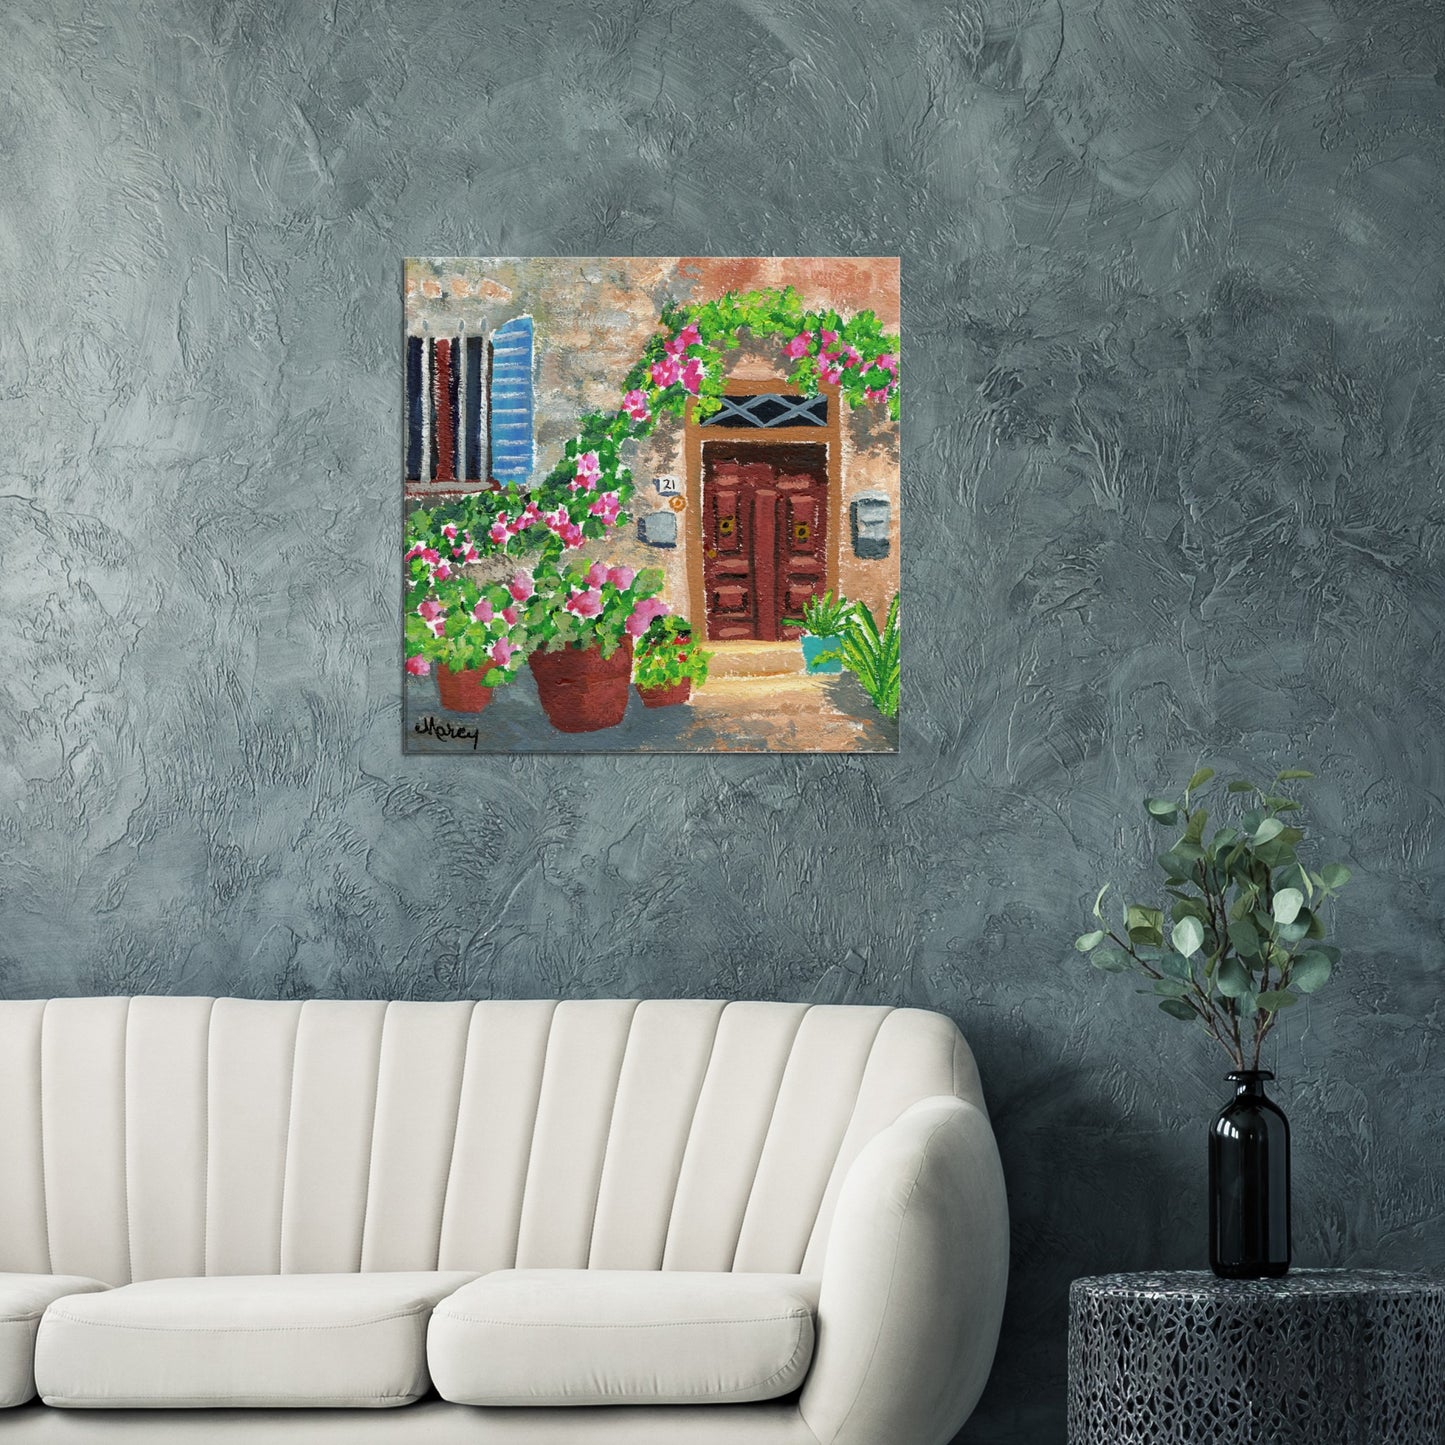 At Home in Italy — Impressionistic Gouache Painting Printed on Stretched Canvas